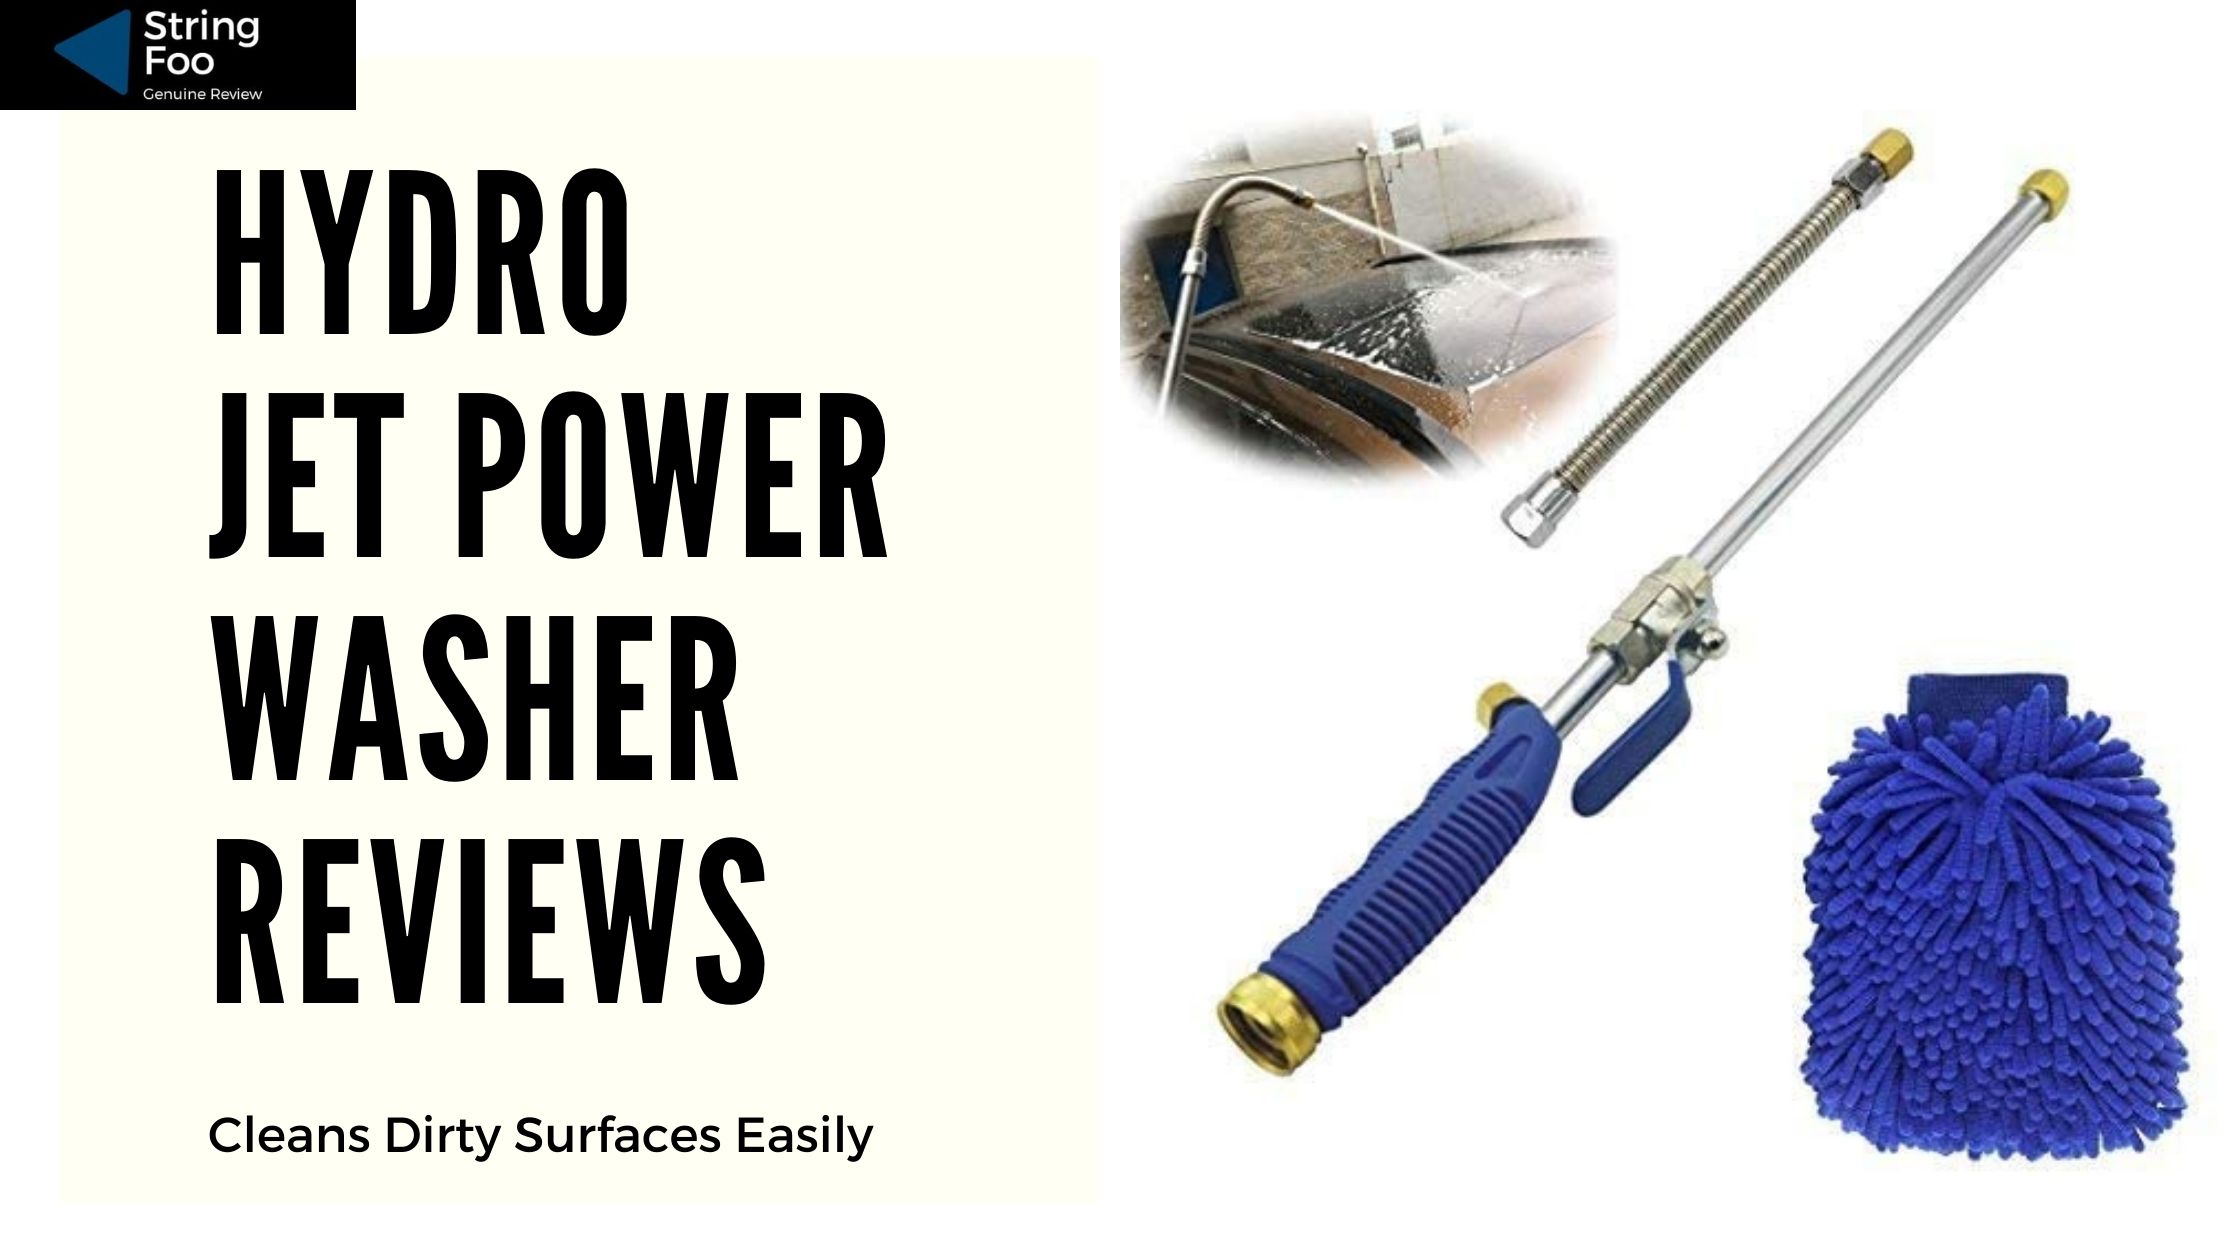 Hydro Jet Power Washer Reviews